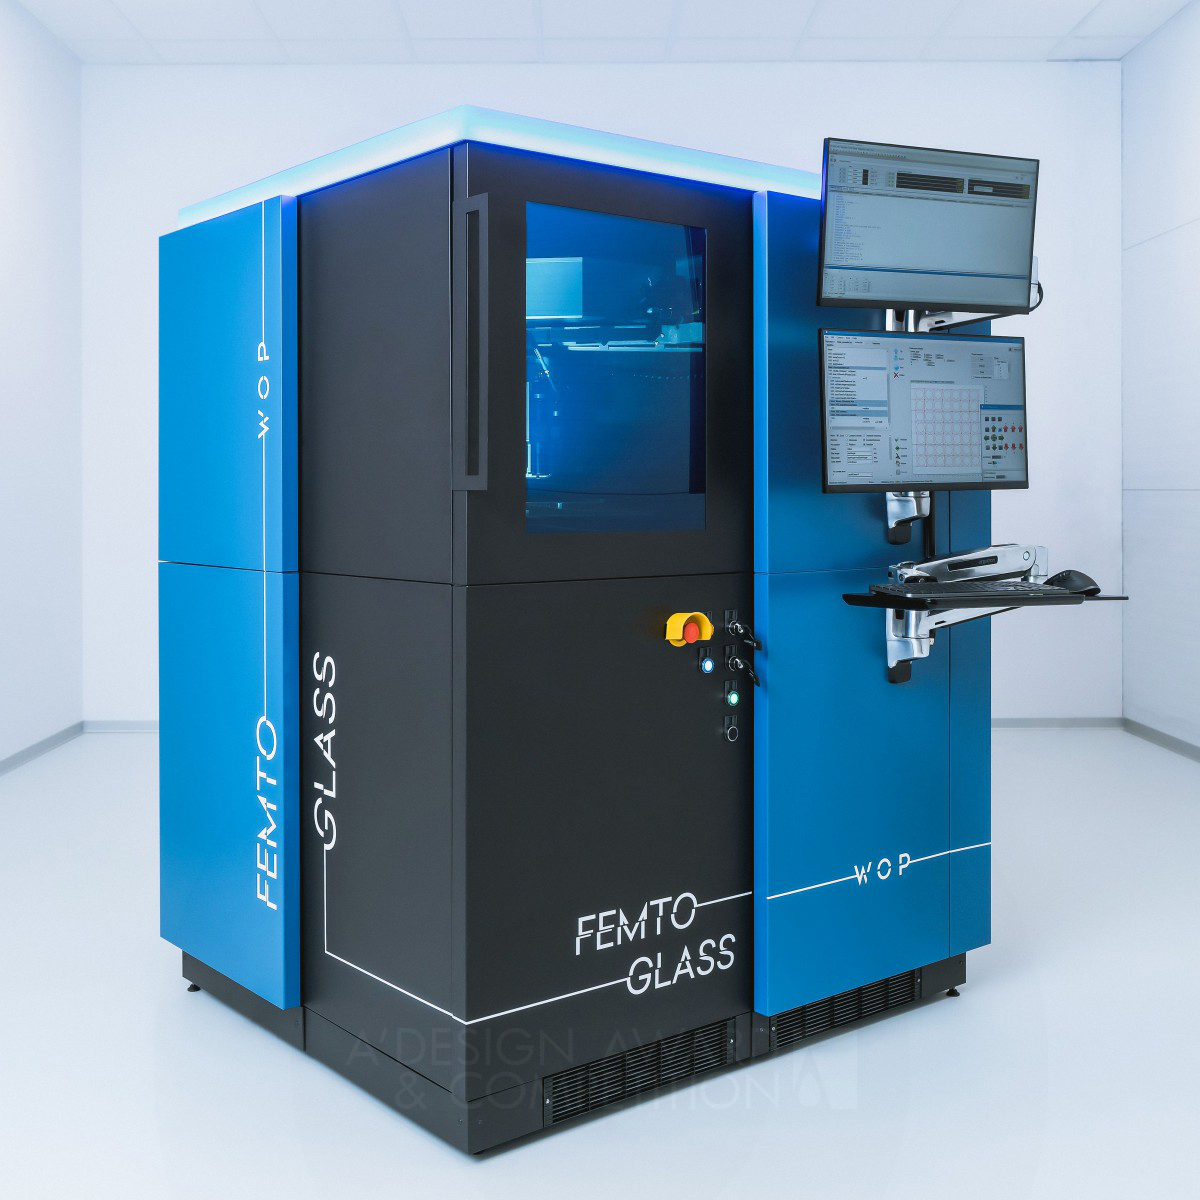 Desdorp wins Iron at the prestigious A' Manufacturing and Processing Machinery Design Award with FemtoGlass   Glass Cutting and Dicing Workstation.